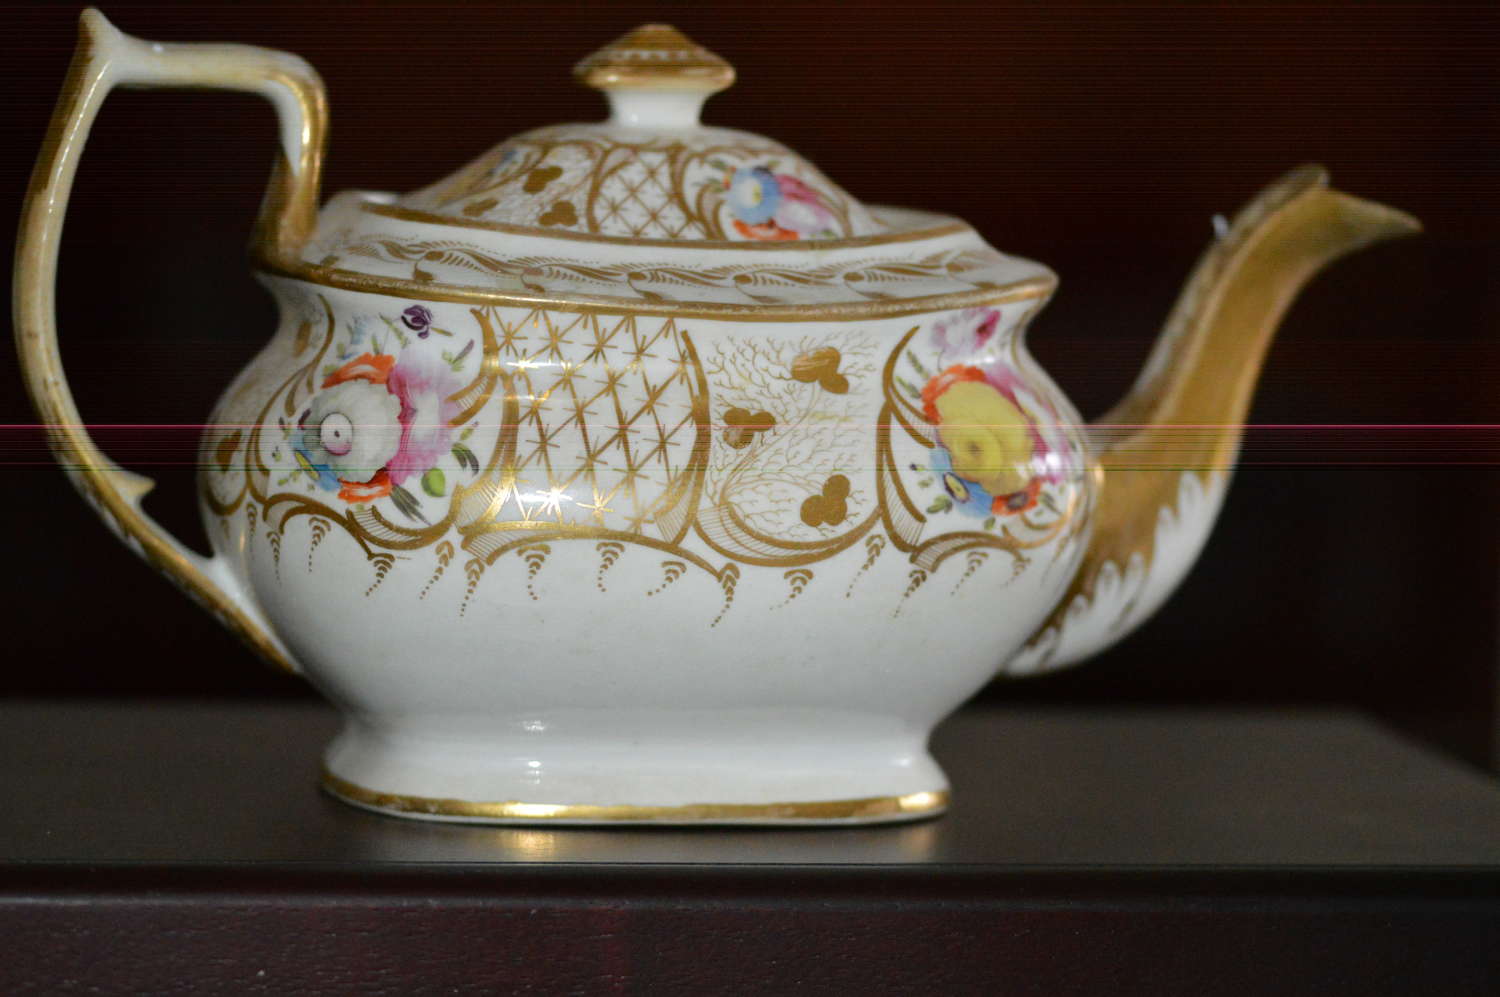 An early 19th Century Porcelain Coalport Teapot and Cover c1810-20